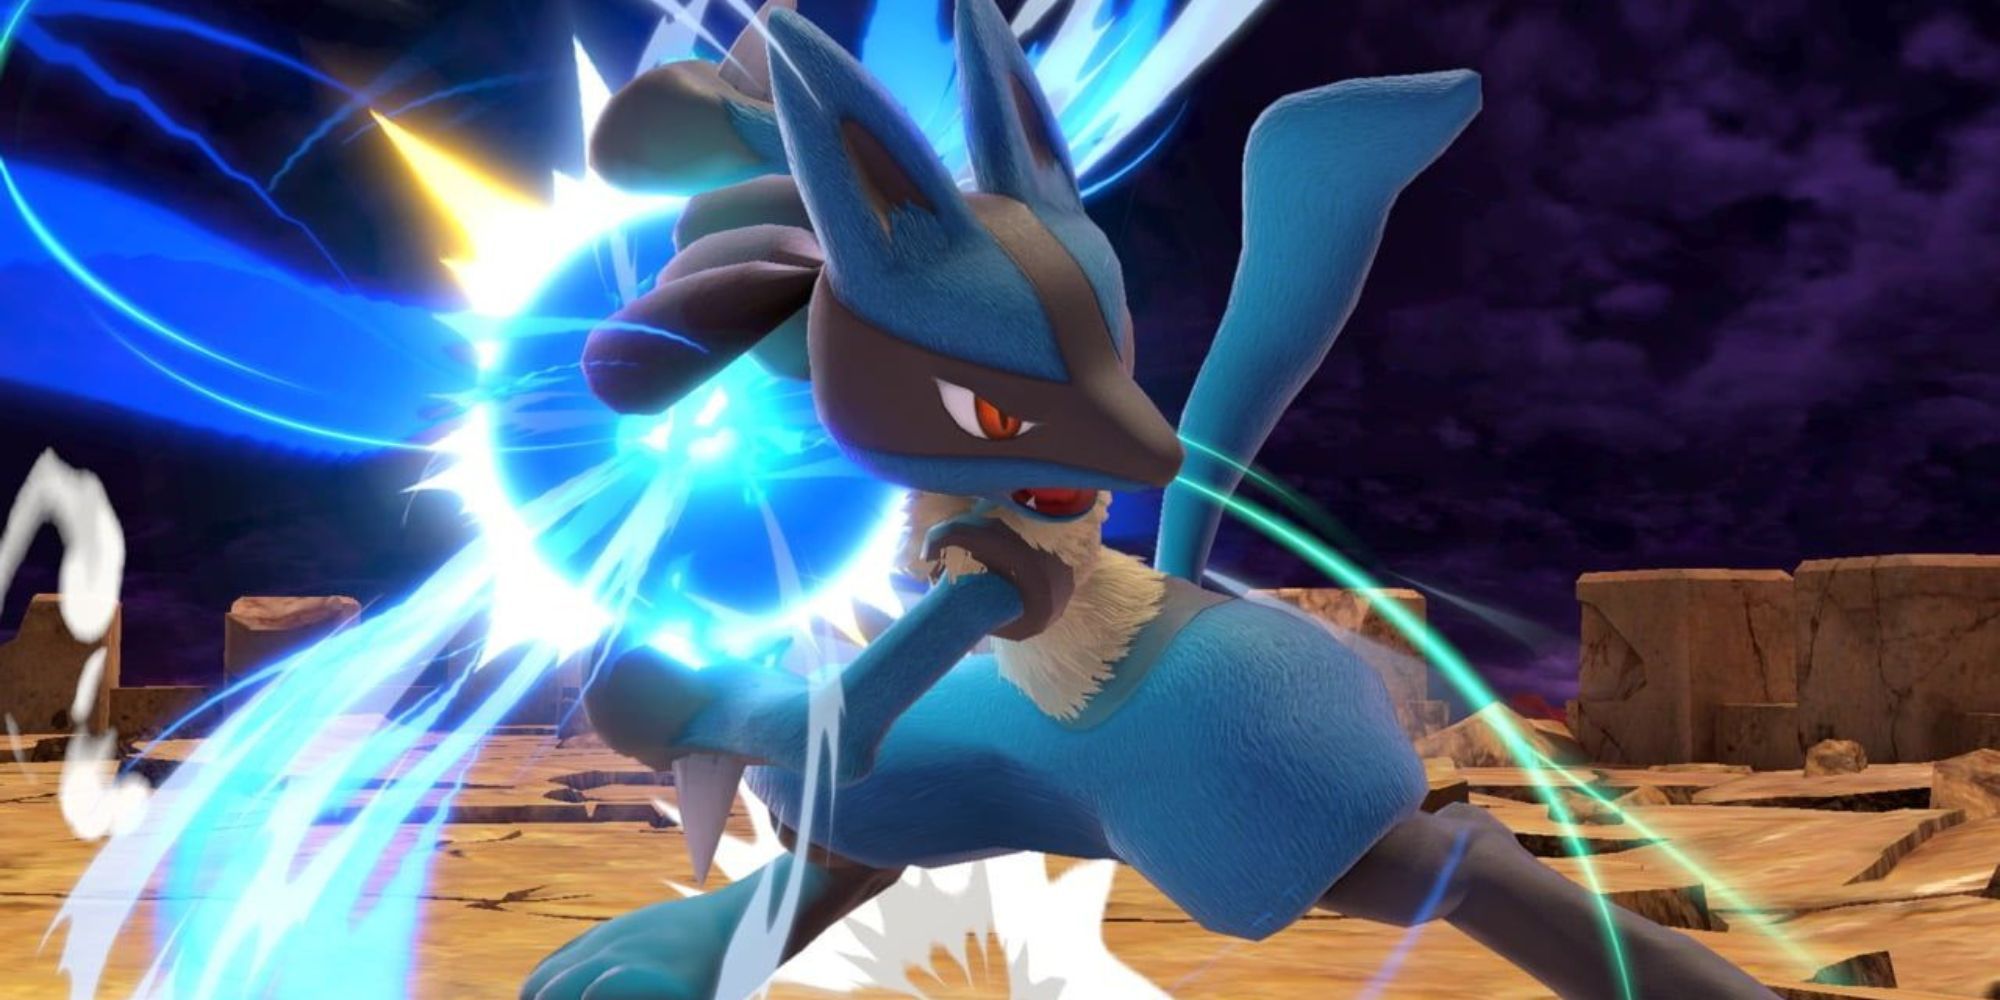 Lucario charges an Aura Sphere attack